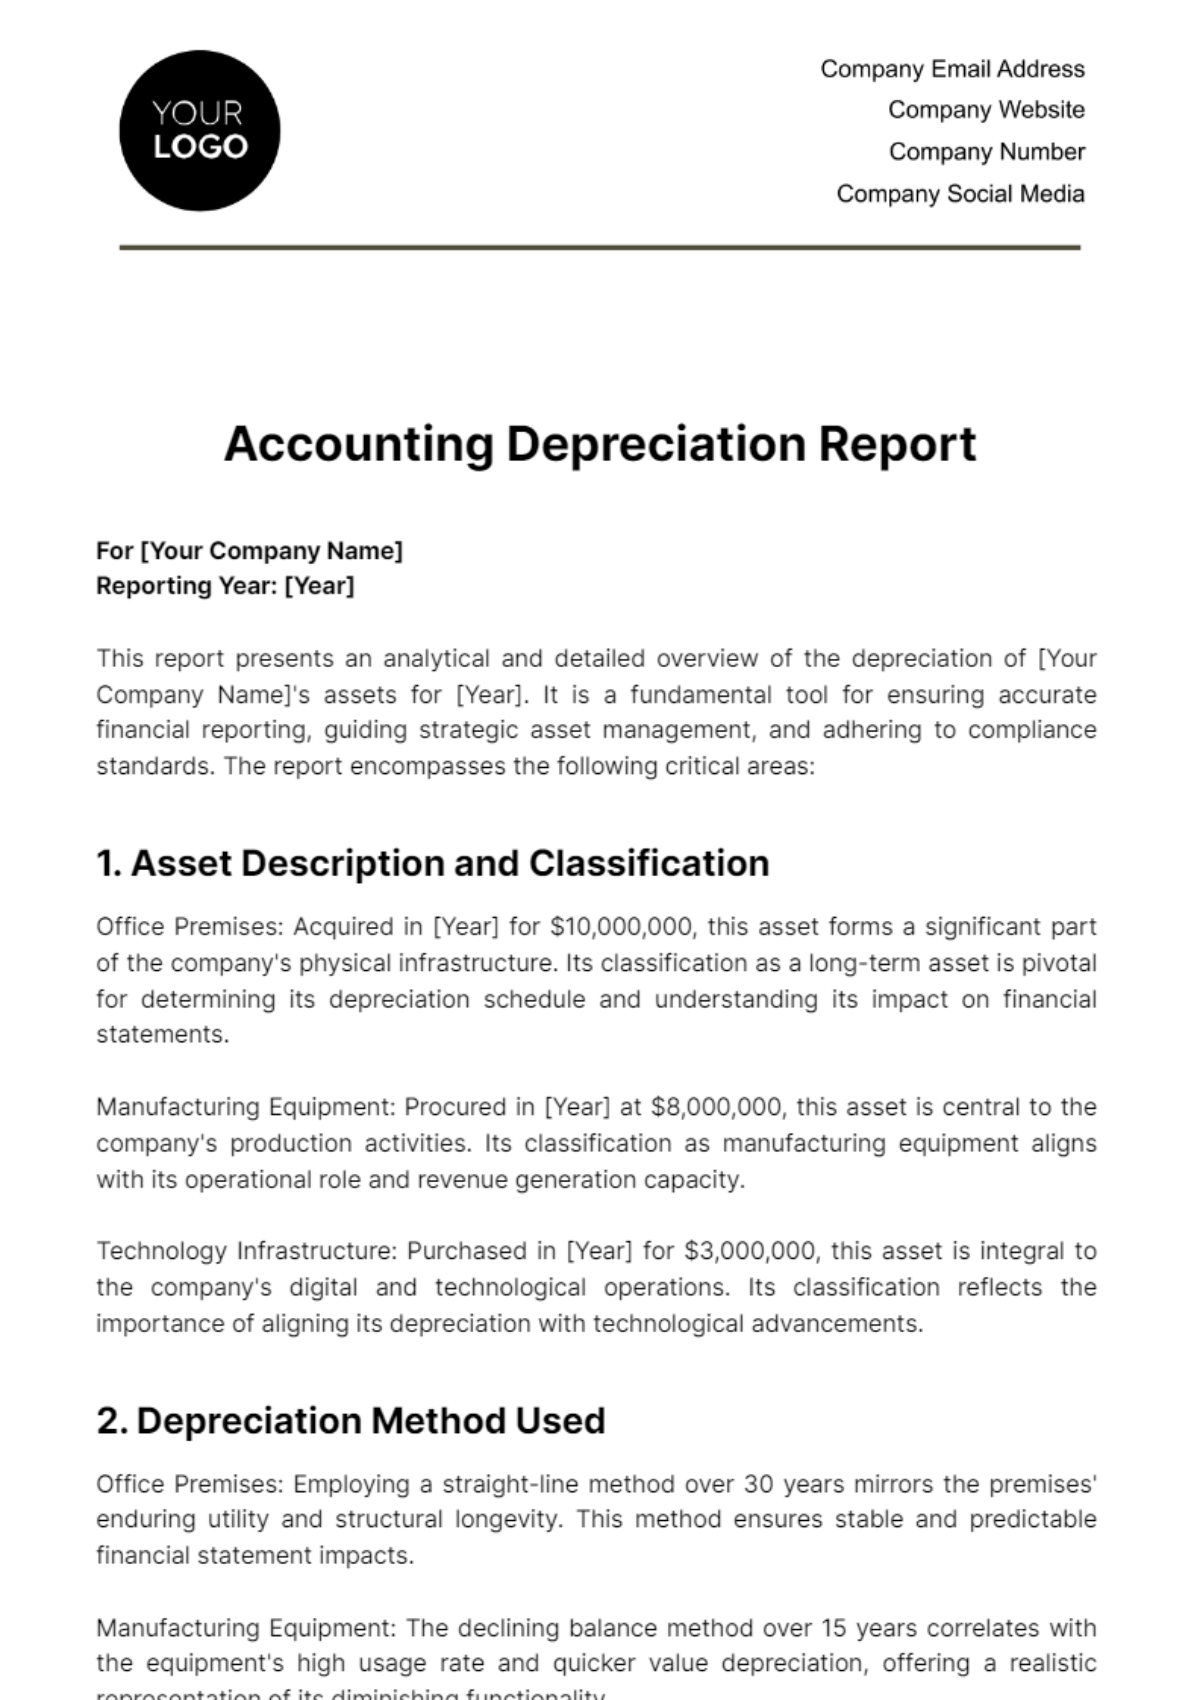 Free Accounting Depreciation Report Template